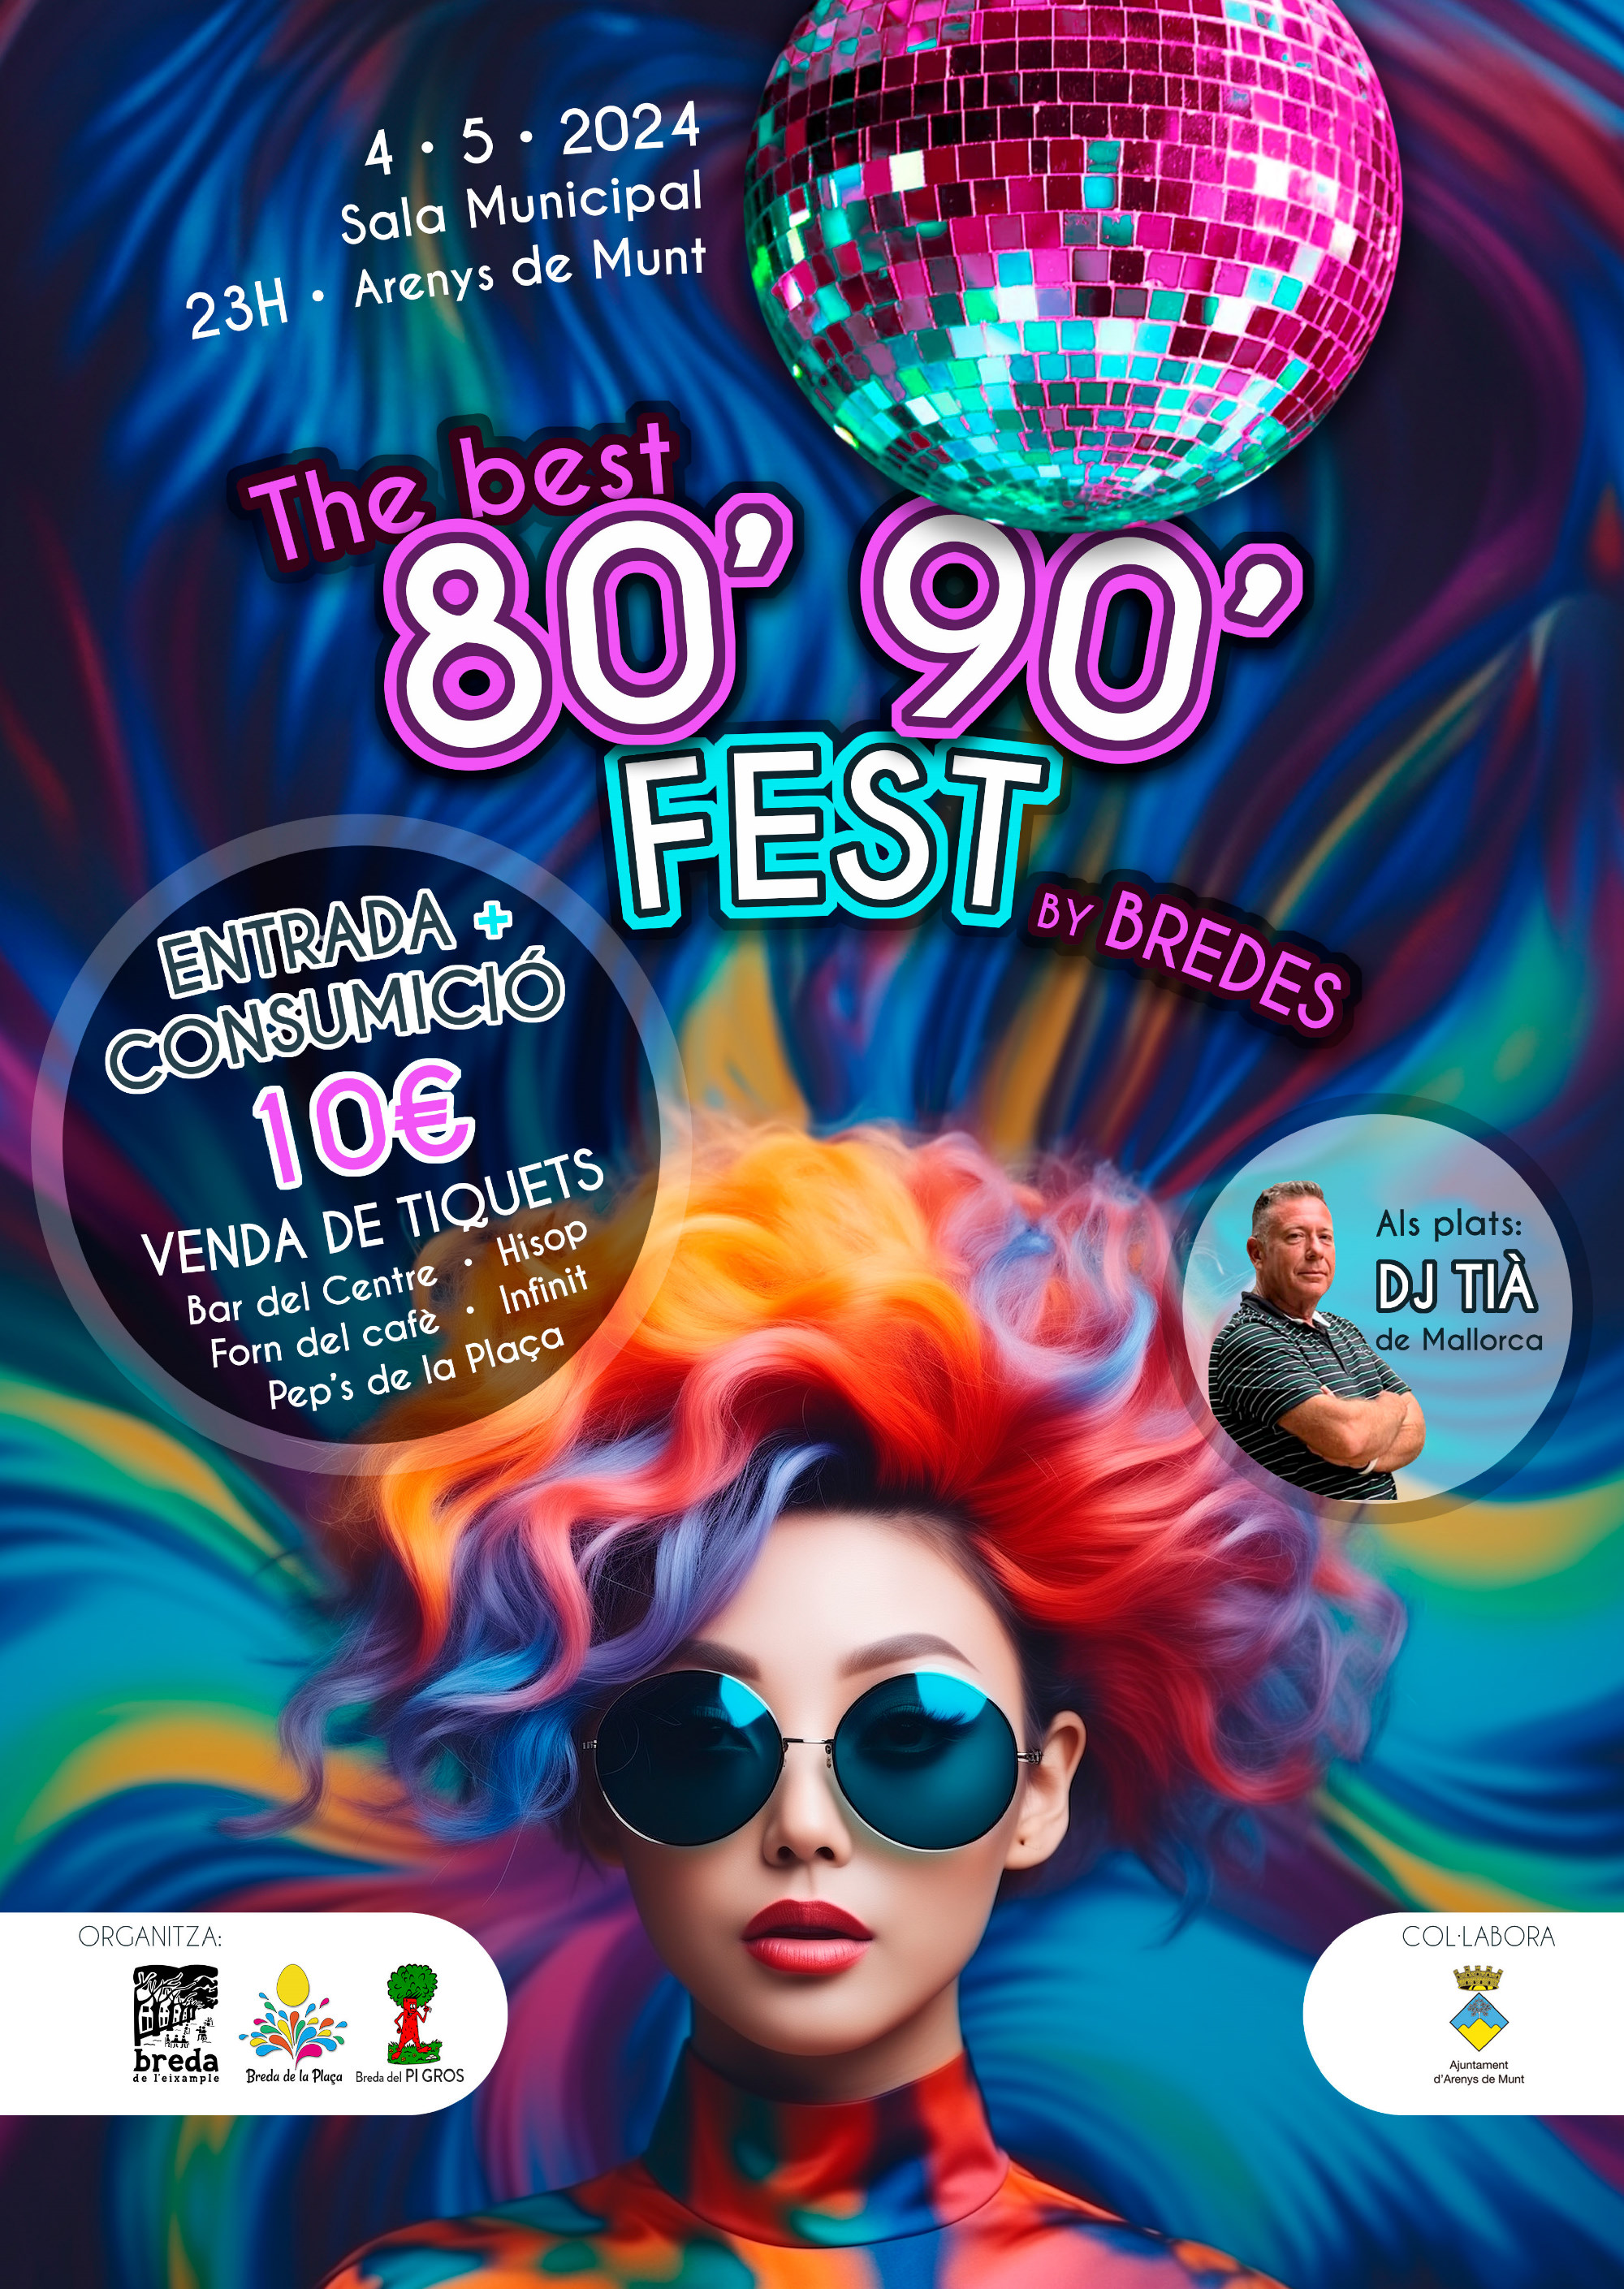 The Best '80 '90 Fest